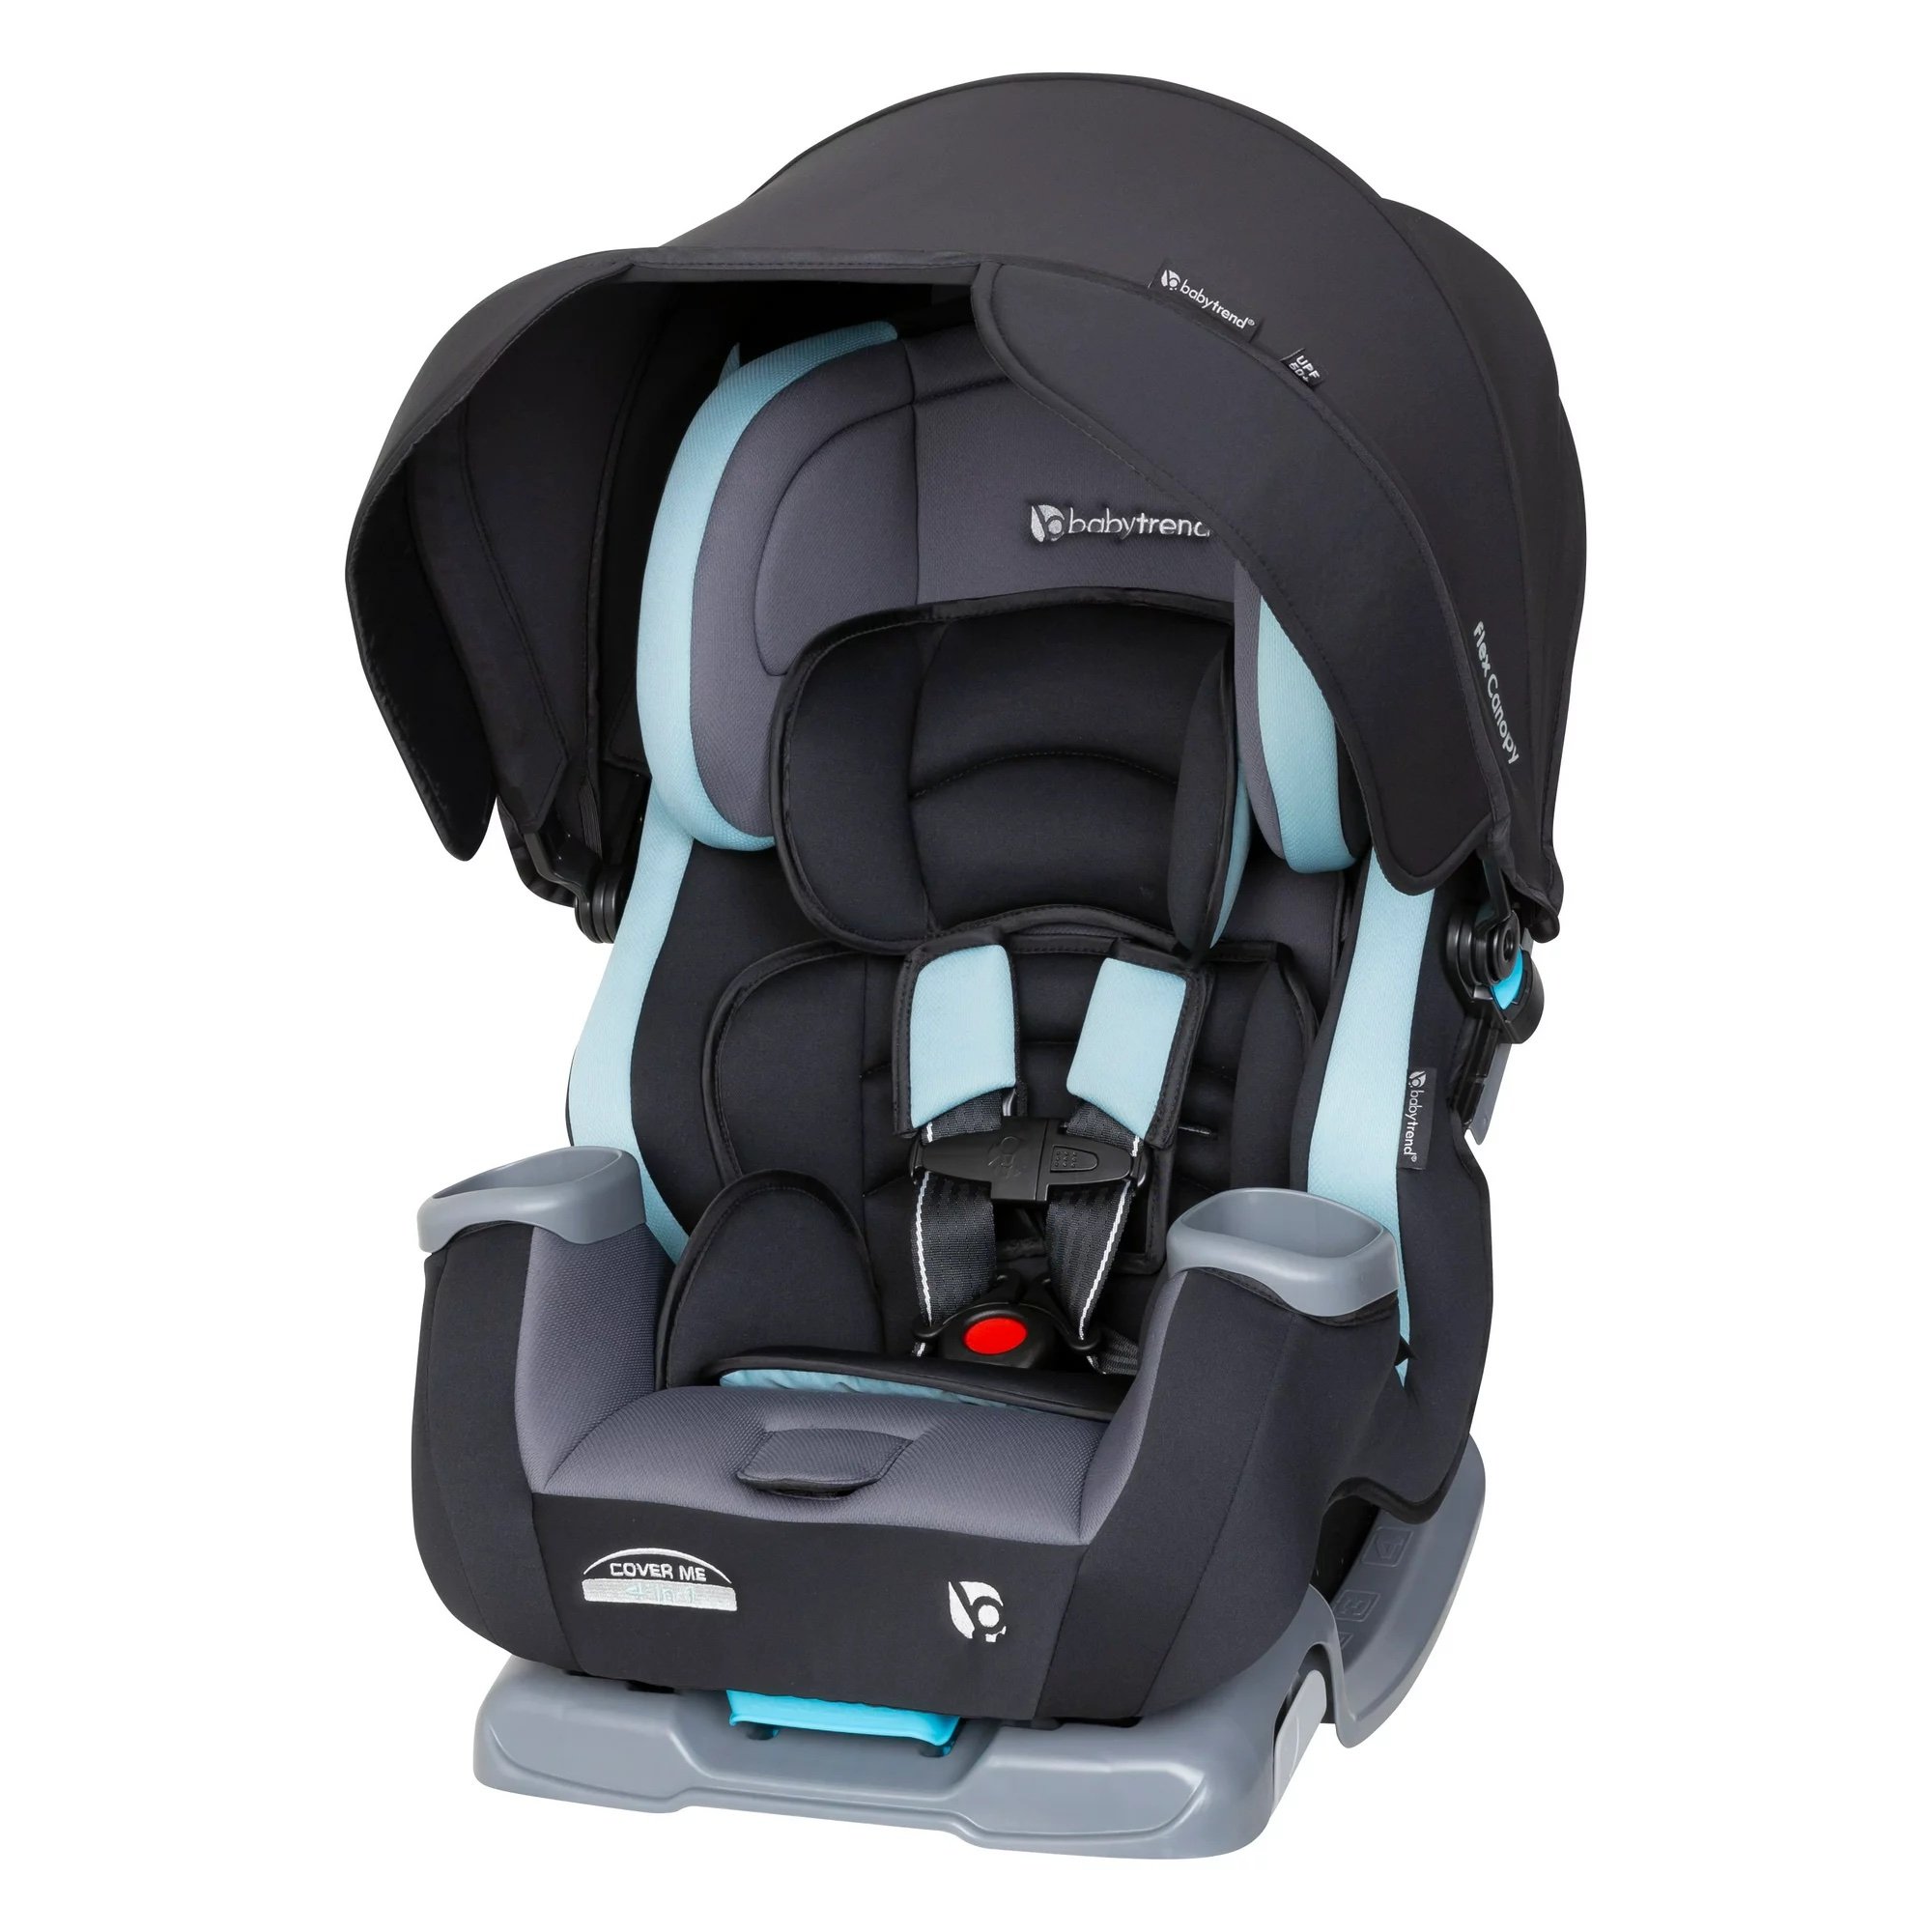 Best convertible car seats (Baby Trend Cover Me 4-in-1 Harness Convertible Car Seat)